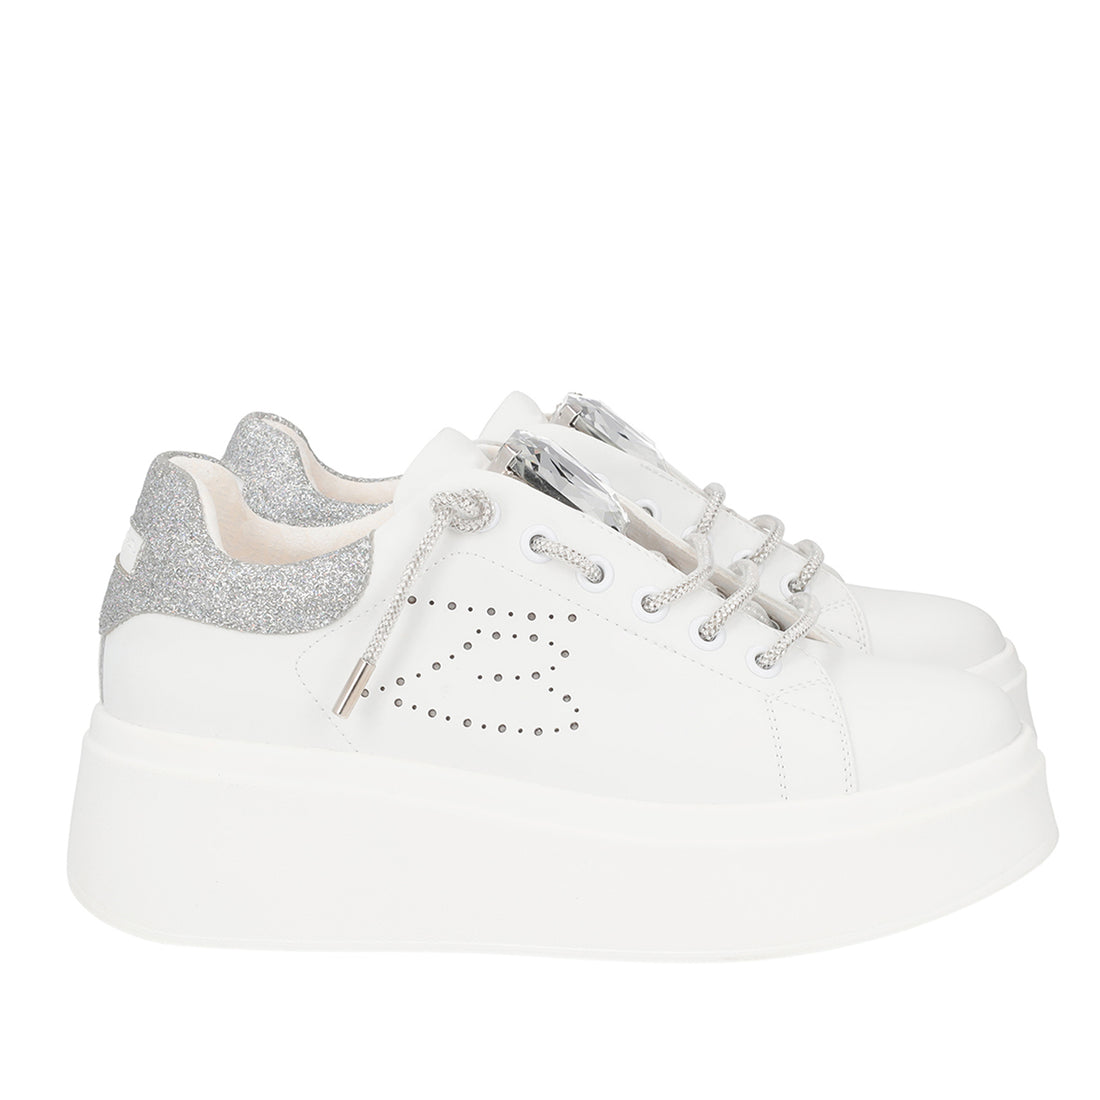 WHITE/SILVER VANITY SNEAKER WITH STONE AND RHINESTONES LACE